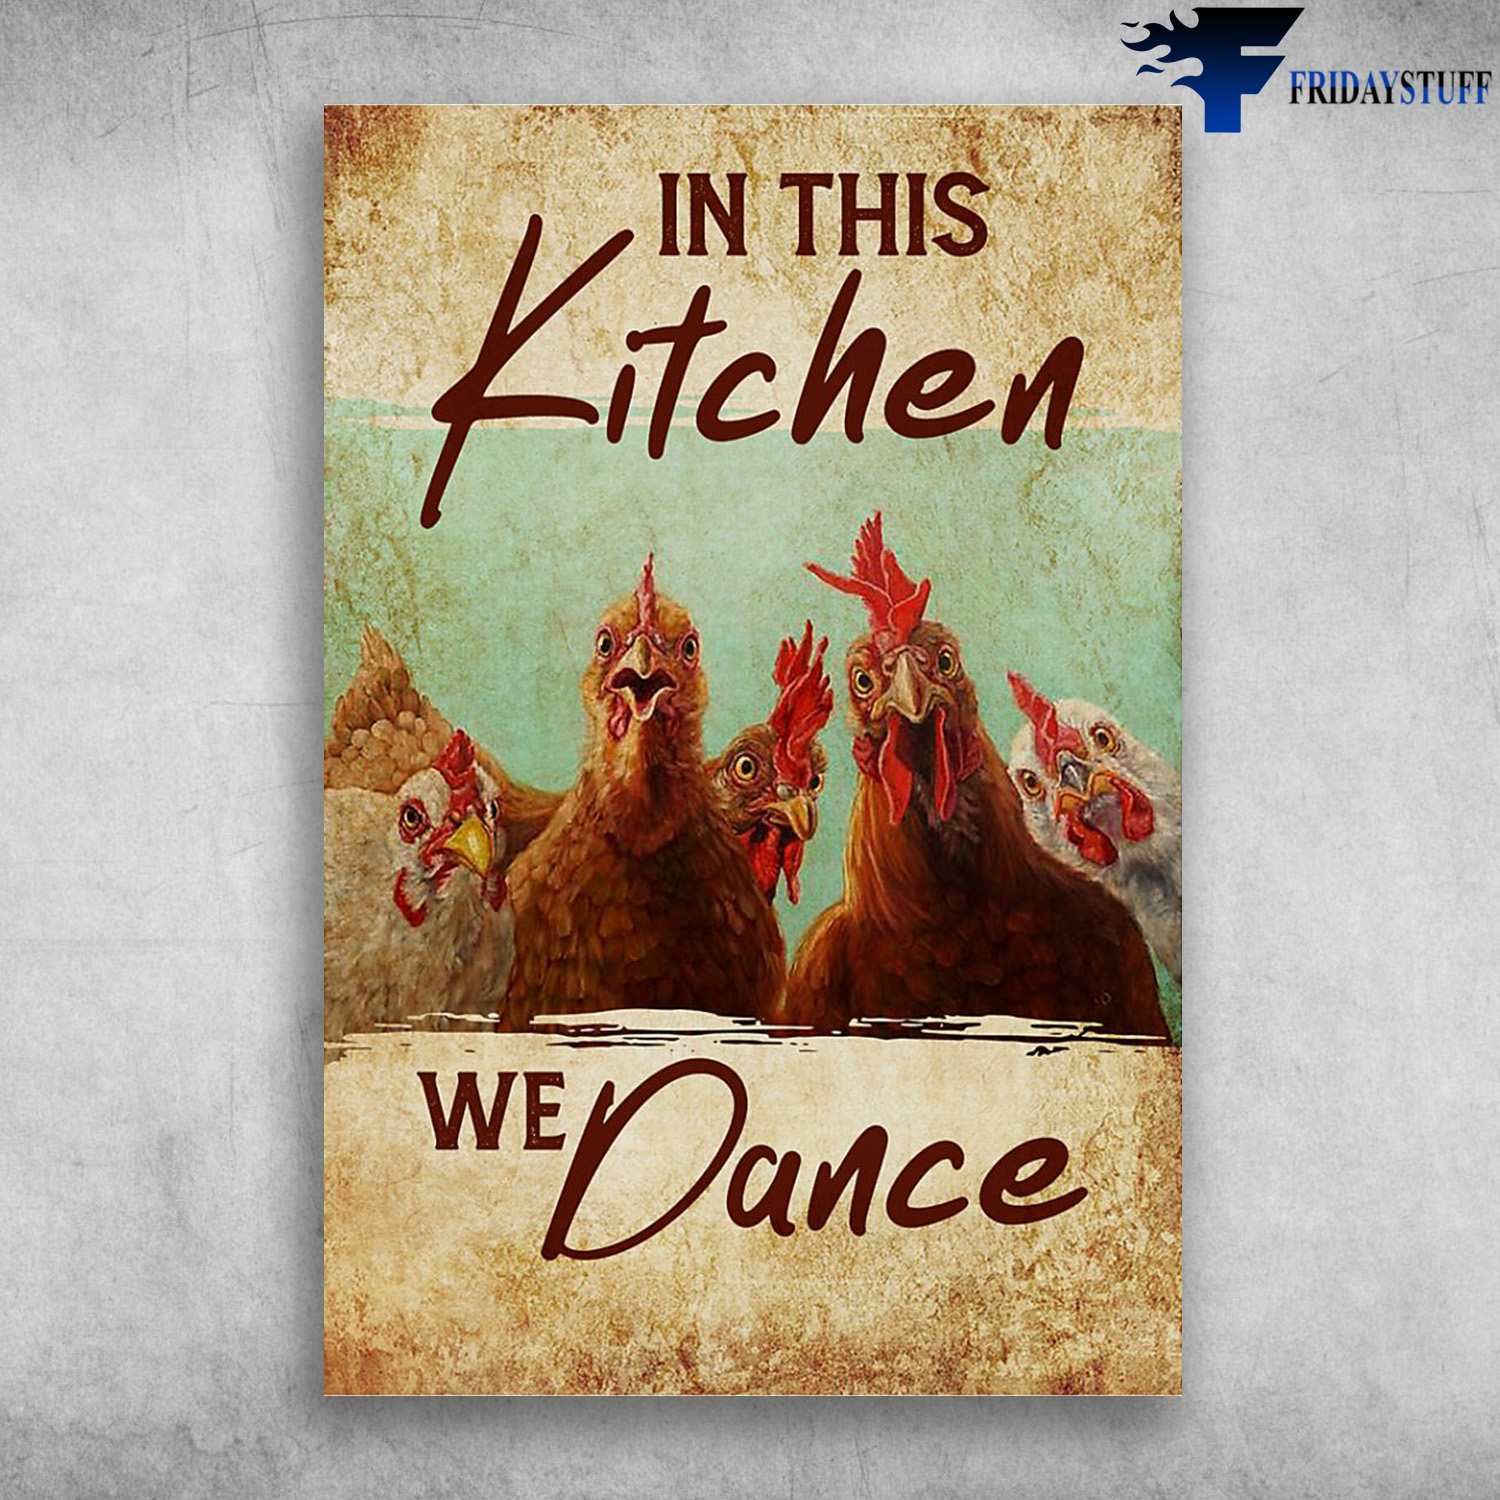 The Chickens - In This Kitchen, We Dance